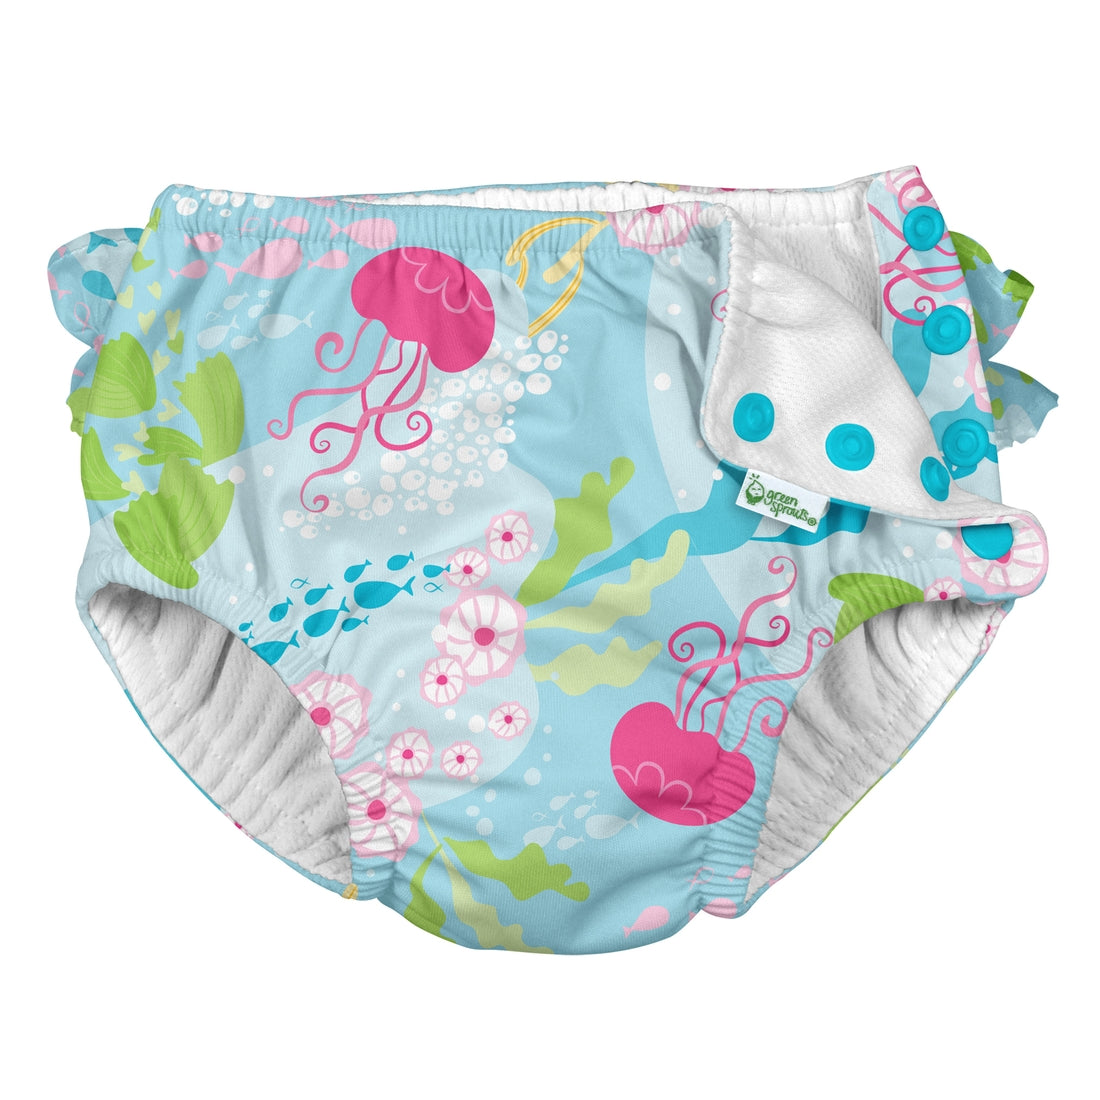 Green Sprouts Ruffle Snap Reusable Swimsuit Diaper